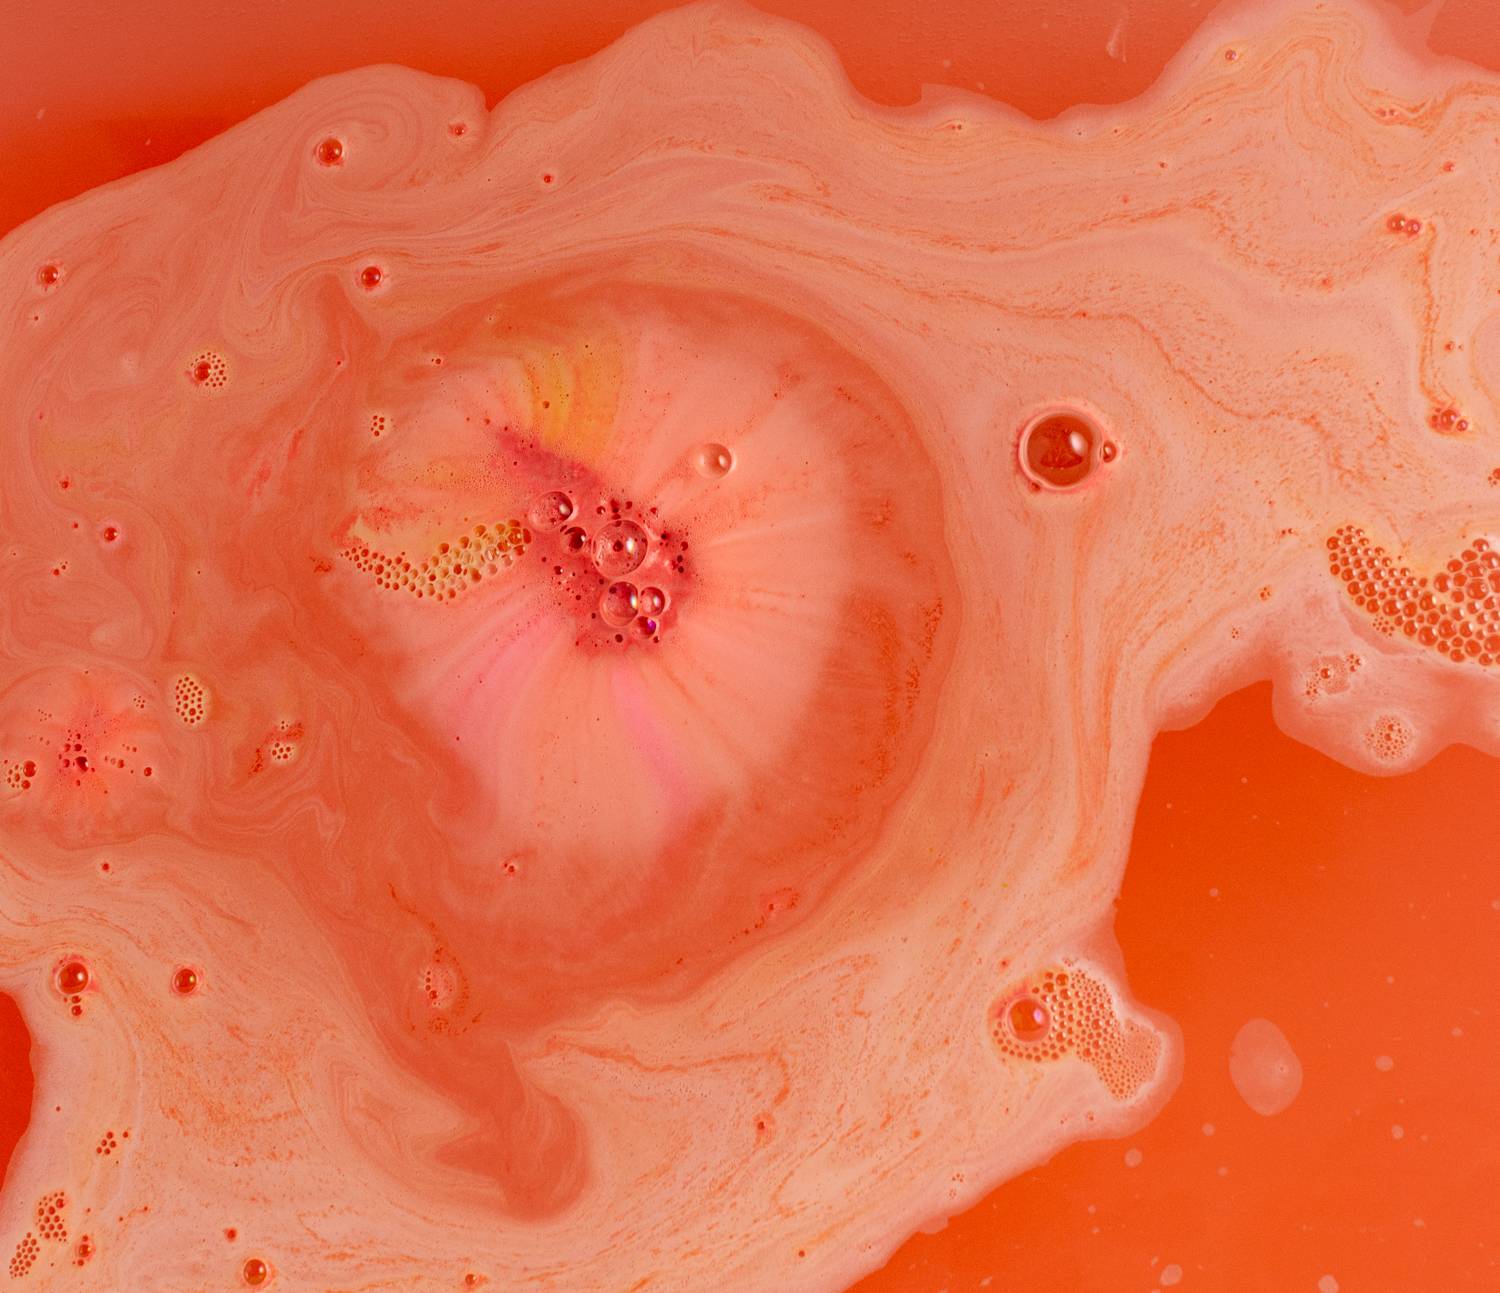 Surprised Patrick bath bomb fizzles among deep coral foam with hints of pink and orange.